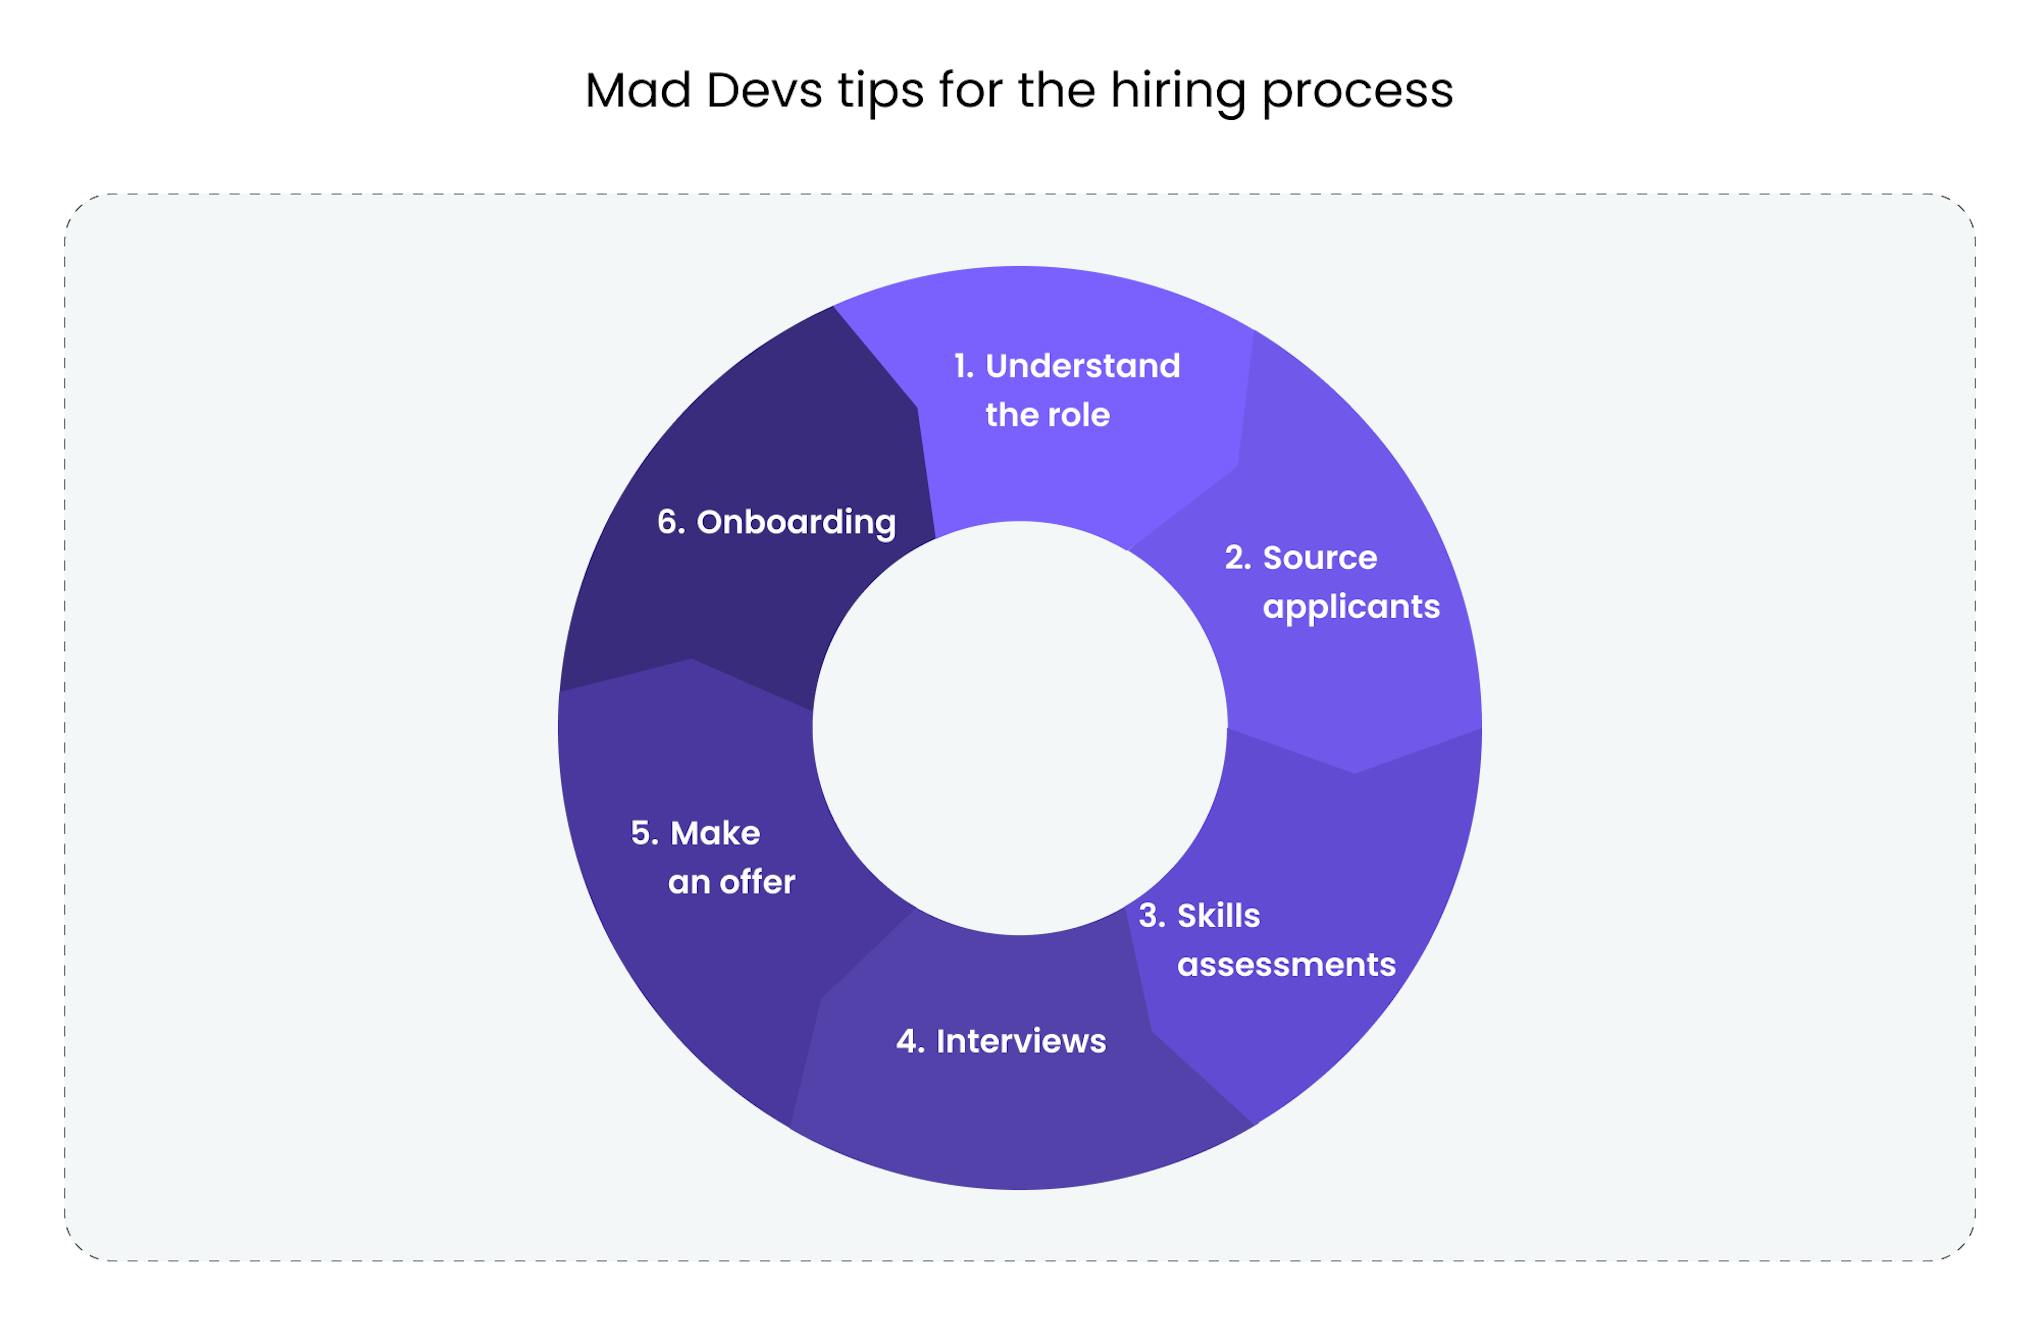 Here Mad Devs tips for the hiring process